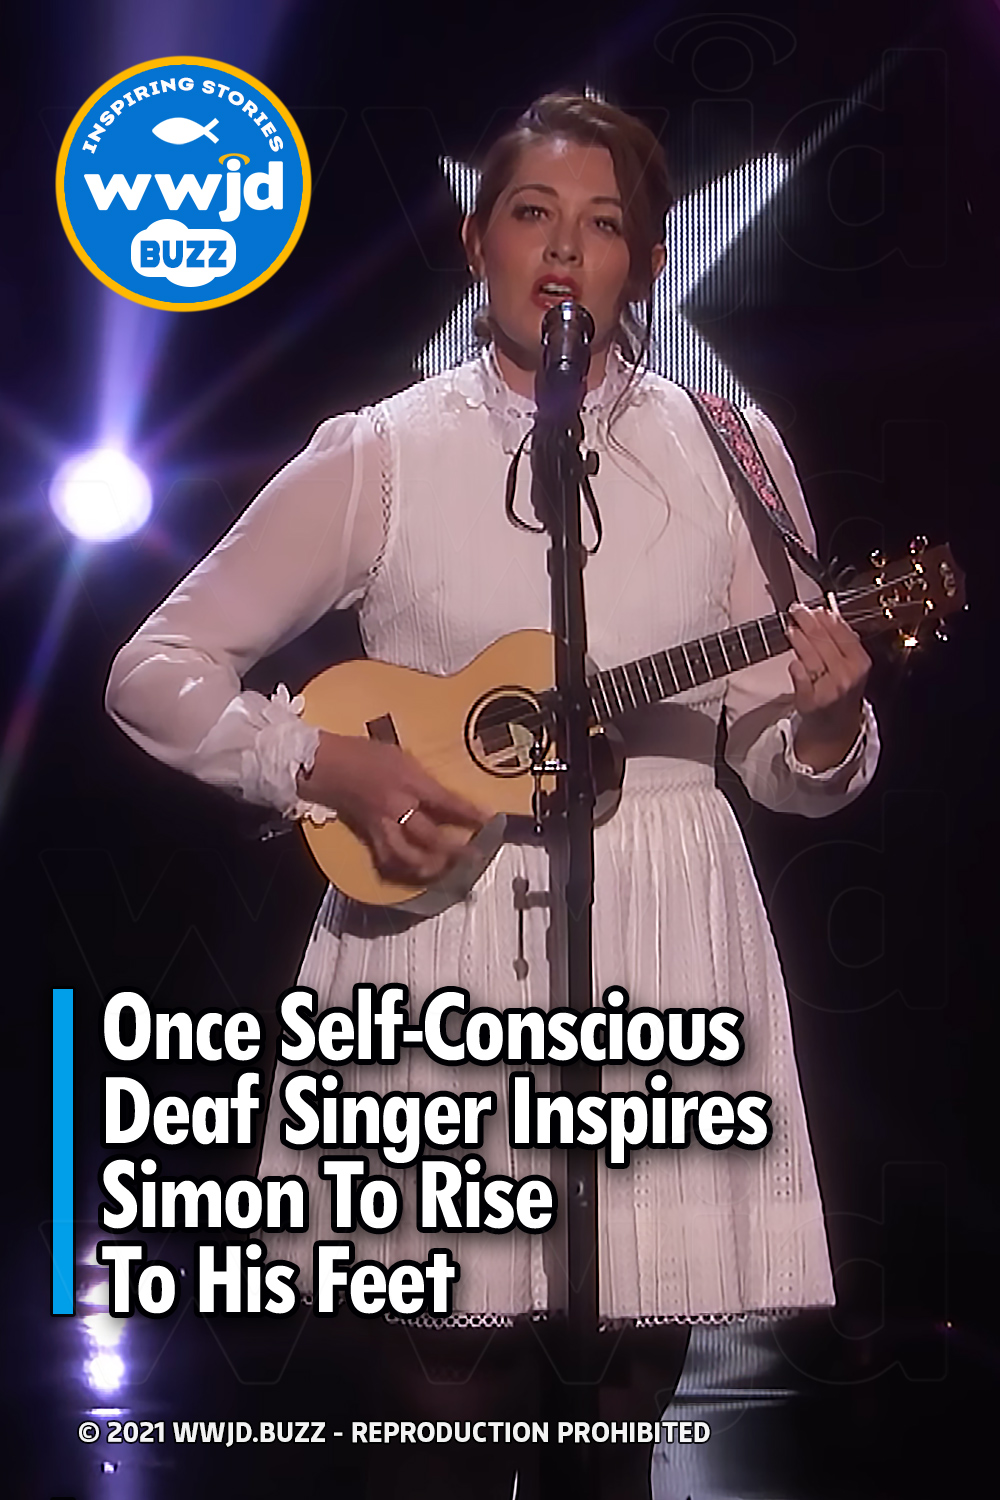 Once Self-Conscious Deaf Singer Inspires Simon To Rise To His Feet